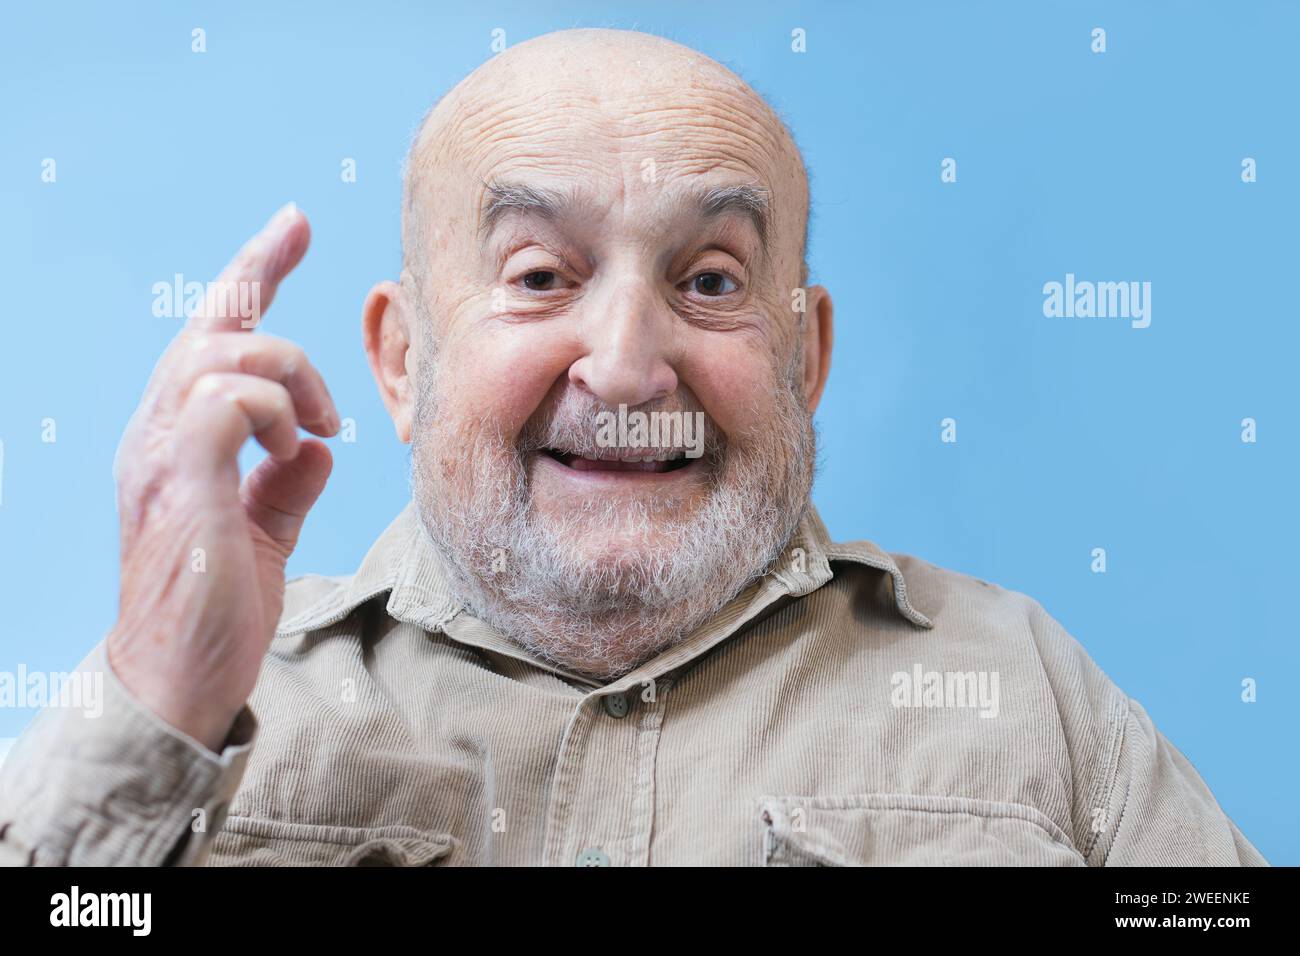 funny old man showing the middle finger isolated on blue background Stock Photo